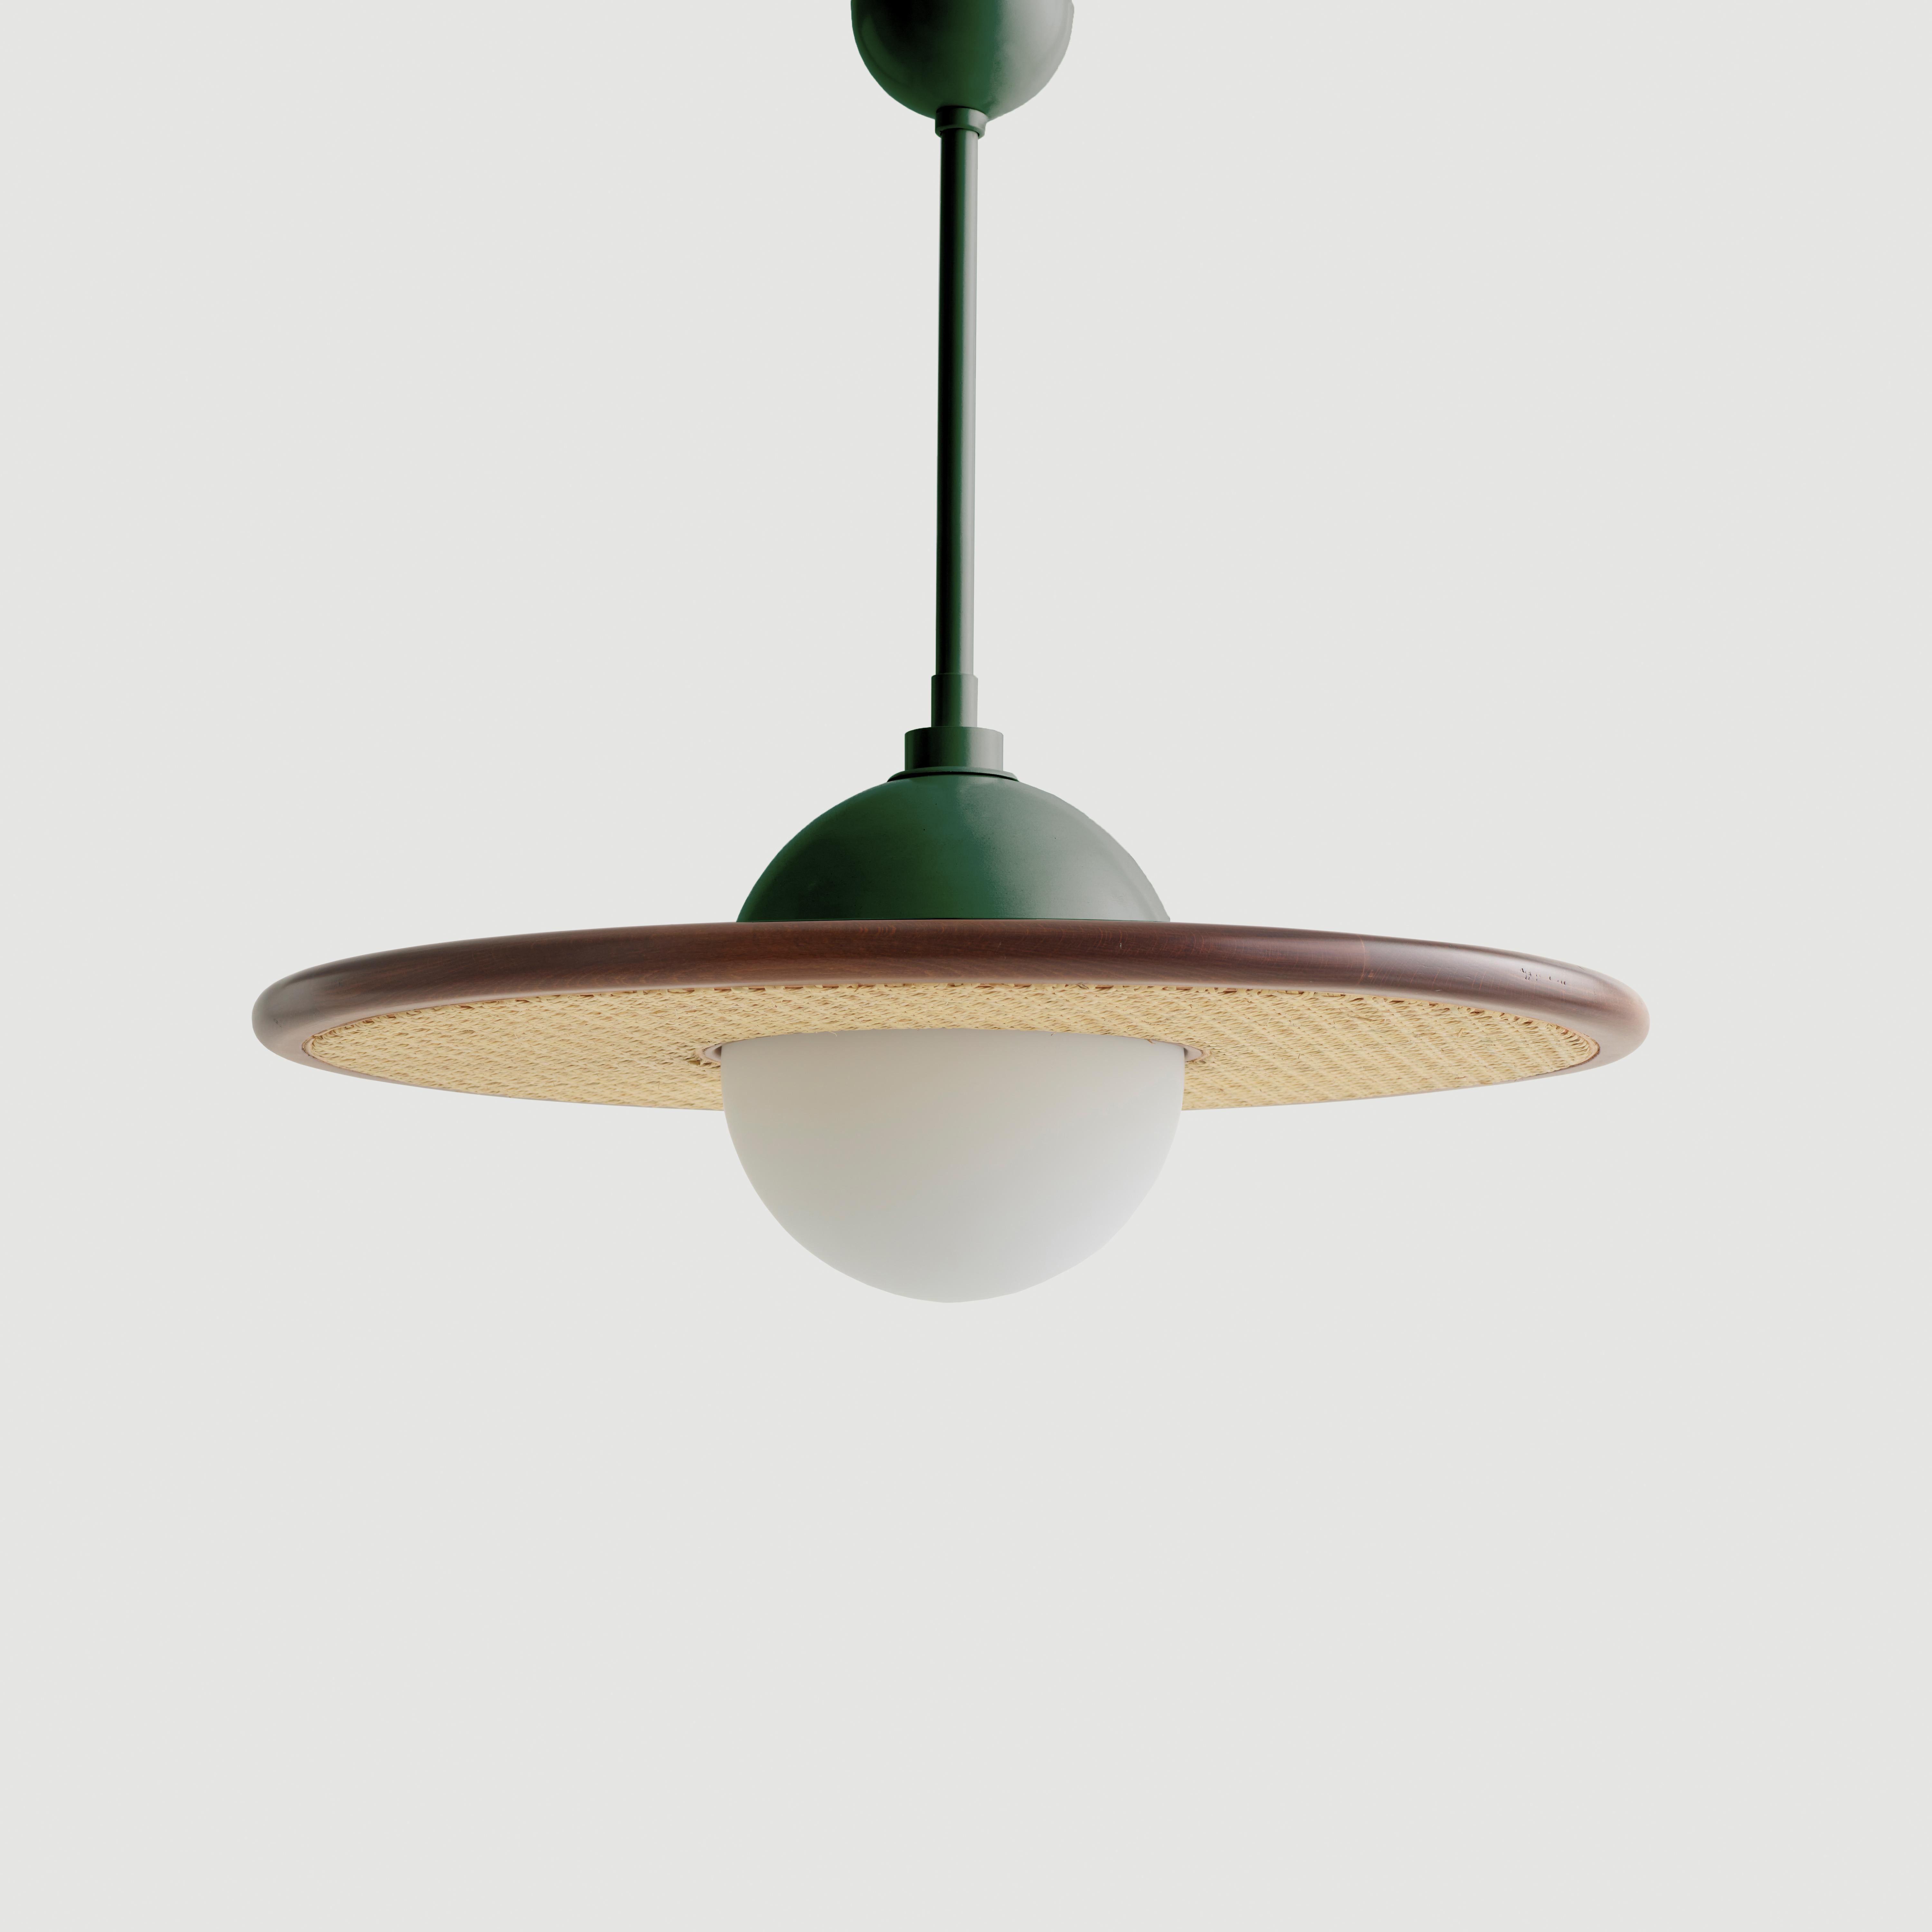 Cassini lamps are named after the famous “Cassini–Huygens” mission which was a collaboration between NASA, the European Space Agency (ESA) and the Italian Space Agency (ASI) to send a probe to study the planet Saturn and its system. Cassini-Huygens